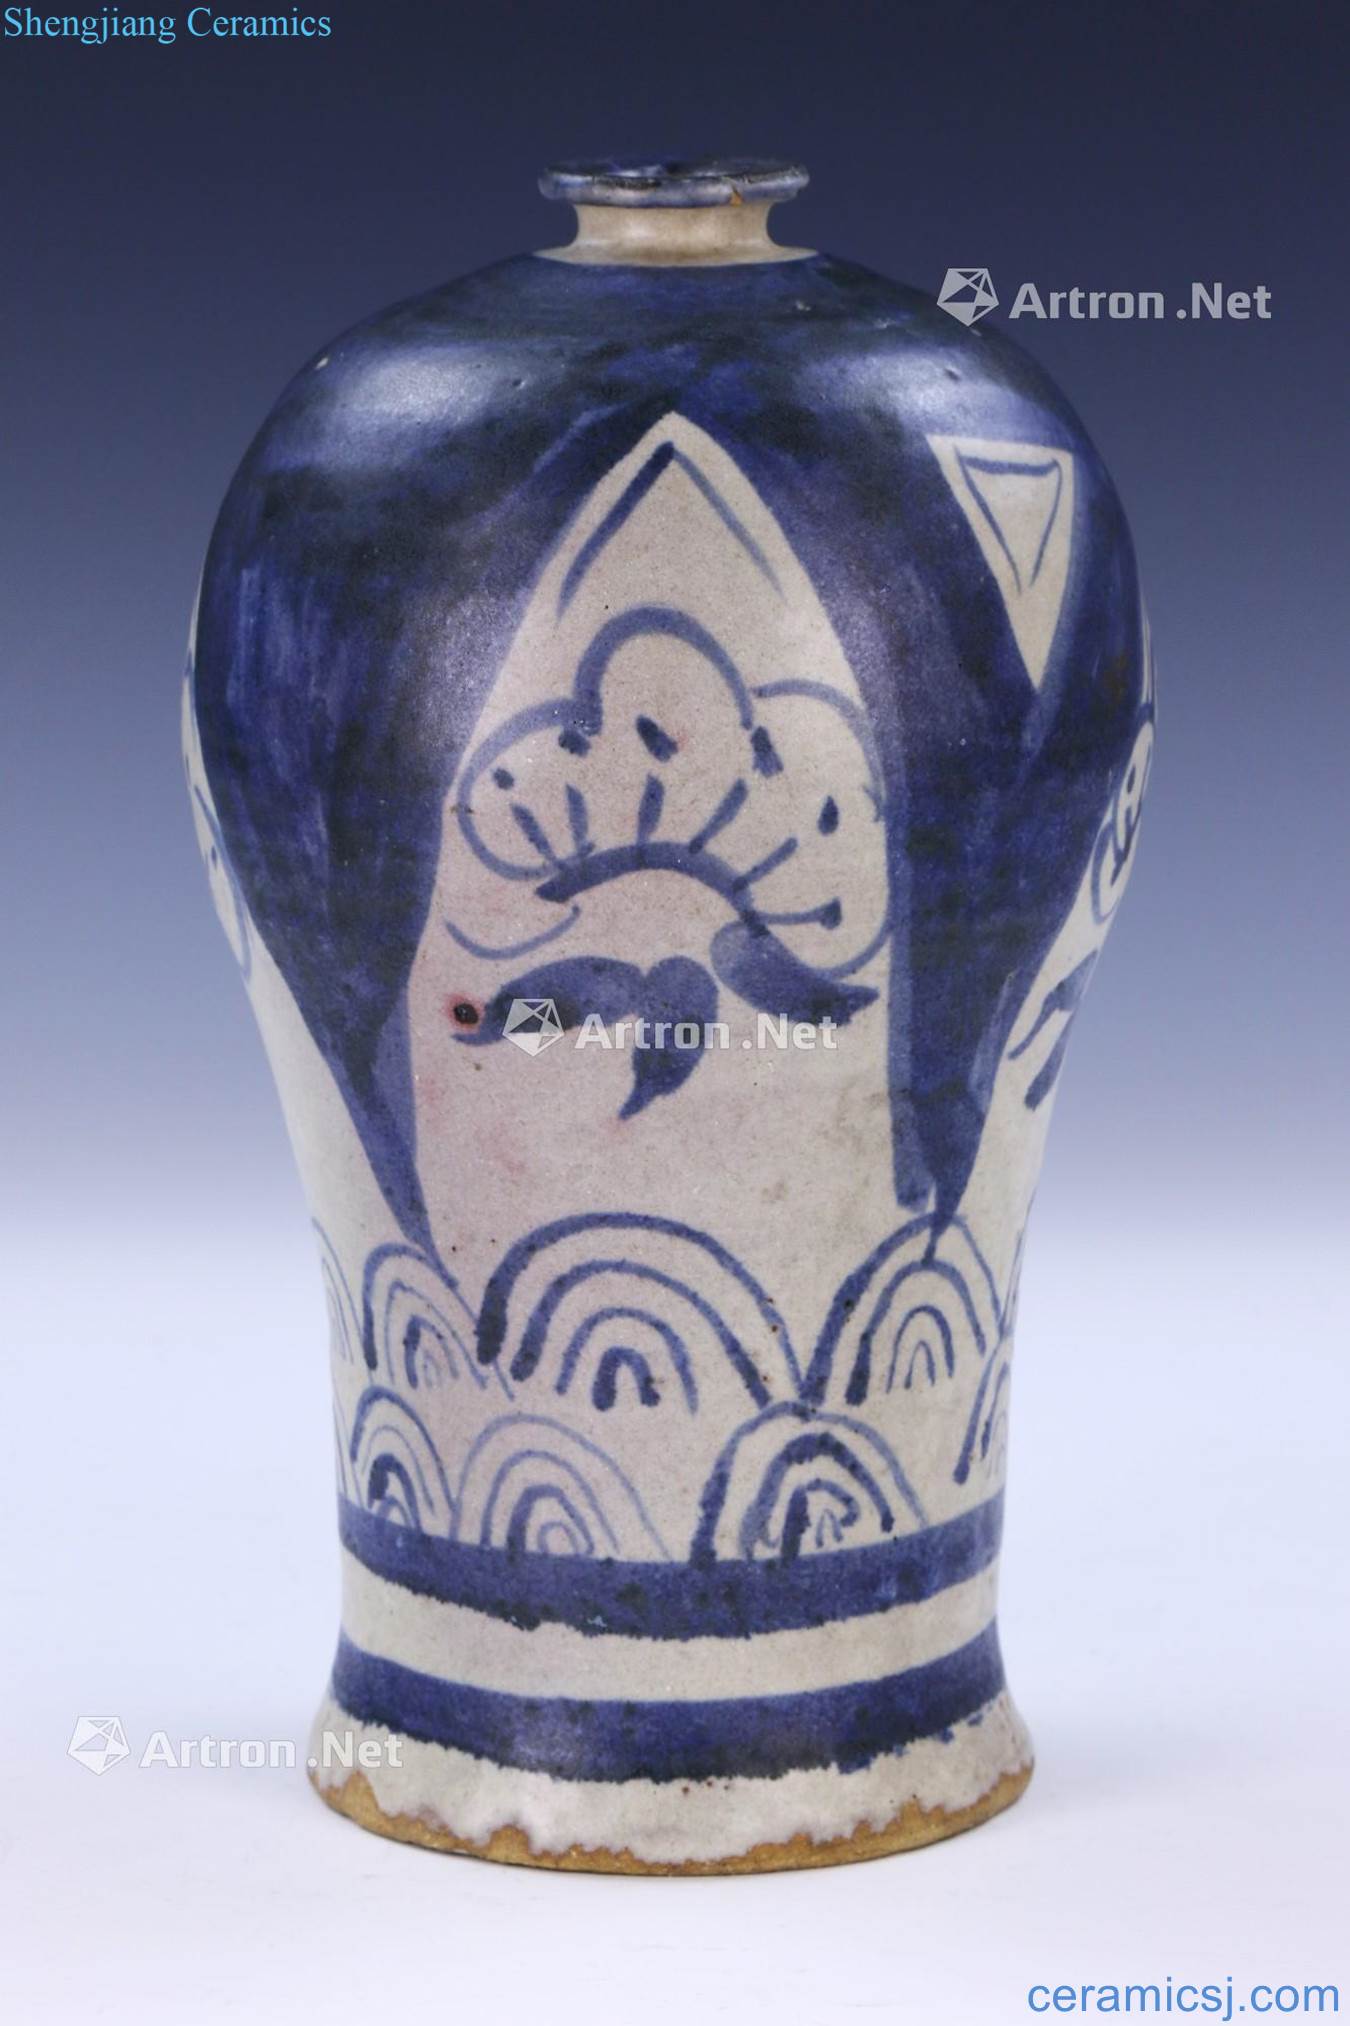 The 14th/15th century Blue and white plum bottle